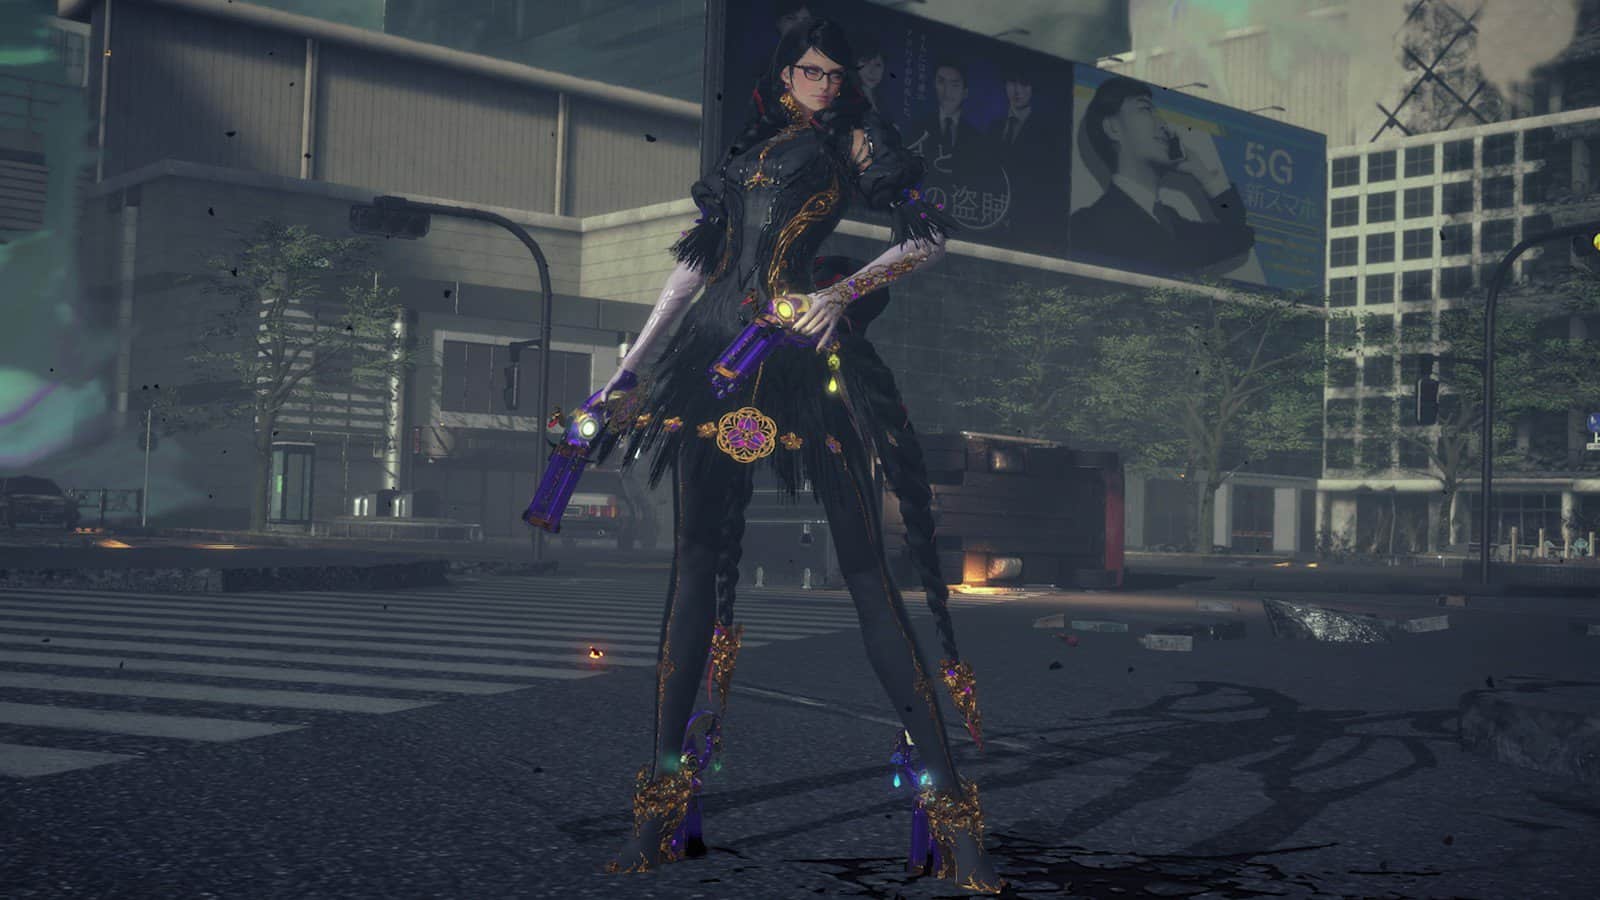 Bayonetta 3 gets a bewitching new trailer including an intriguing Metroid-style mode